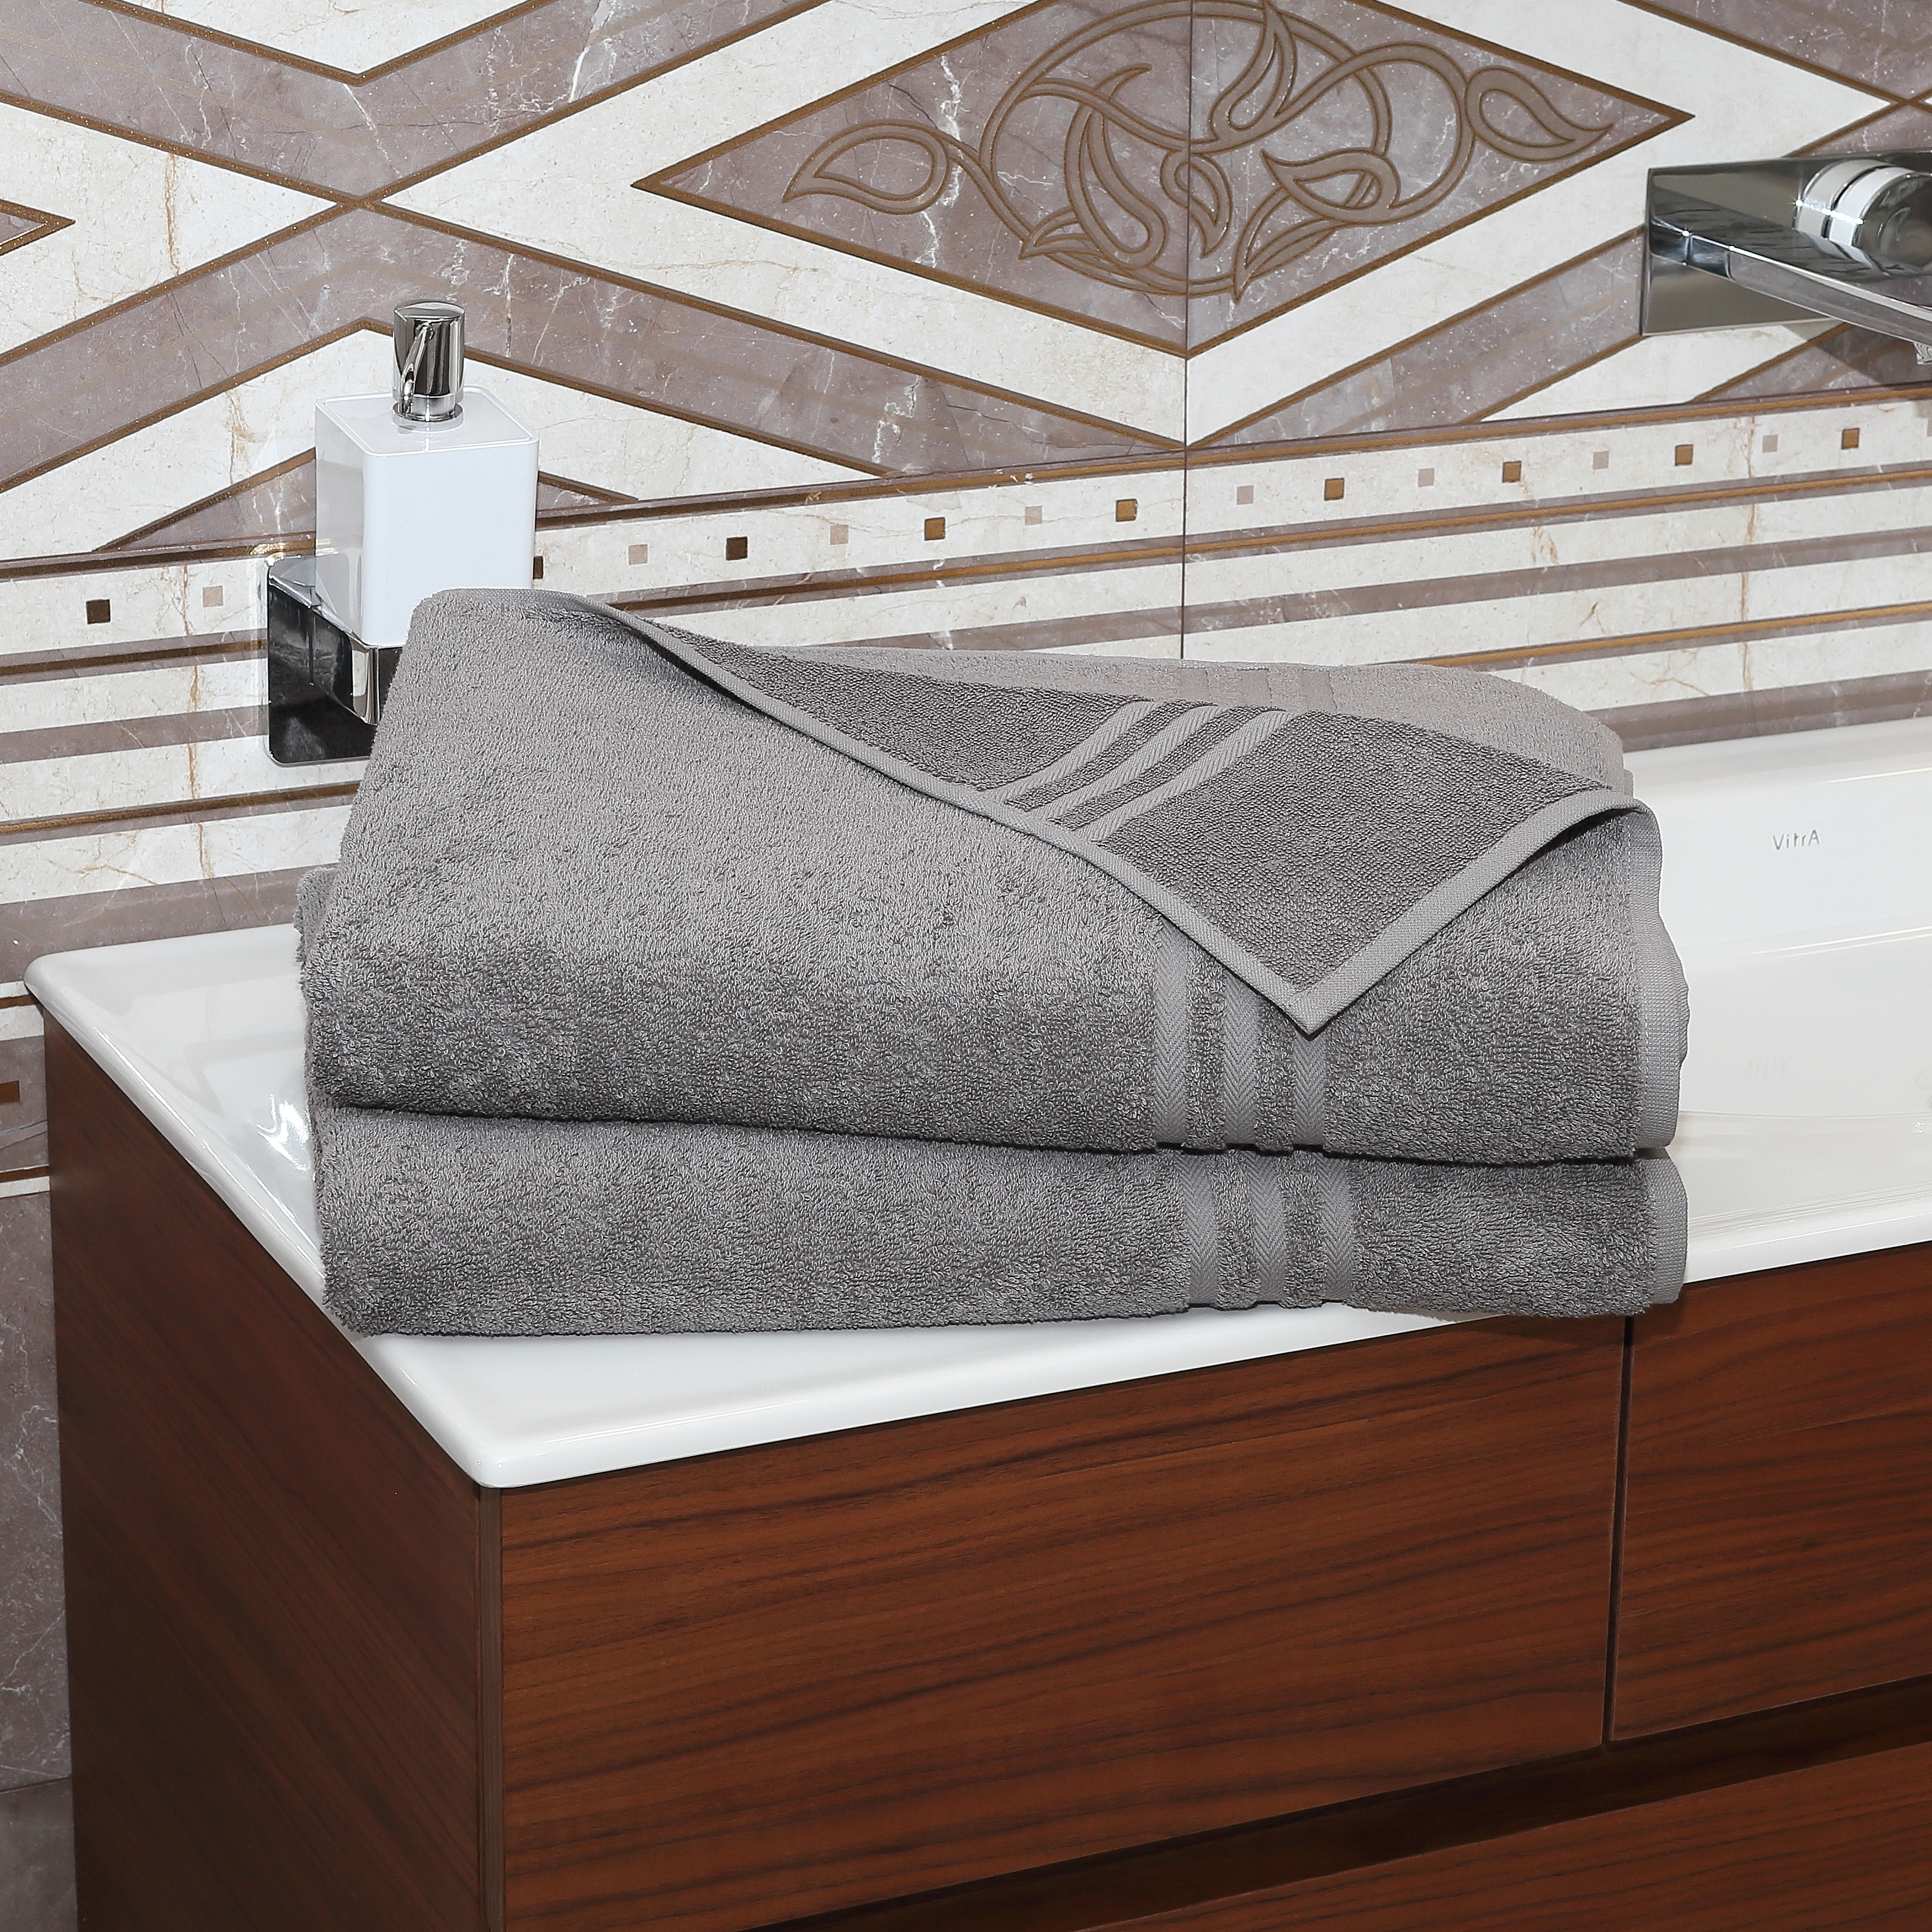 https://ak1.ostkcdn.com/images/products/12855990/Authentic-Hotel-and-Spa-Omni-Turkish-Cotton-Terry-Oversized-Bath-Sheet-Towels-Set-of-2-33a69268-7fd3-45e8-bc63-741b72192dd9.jpg